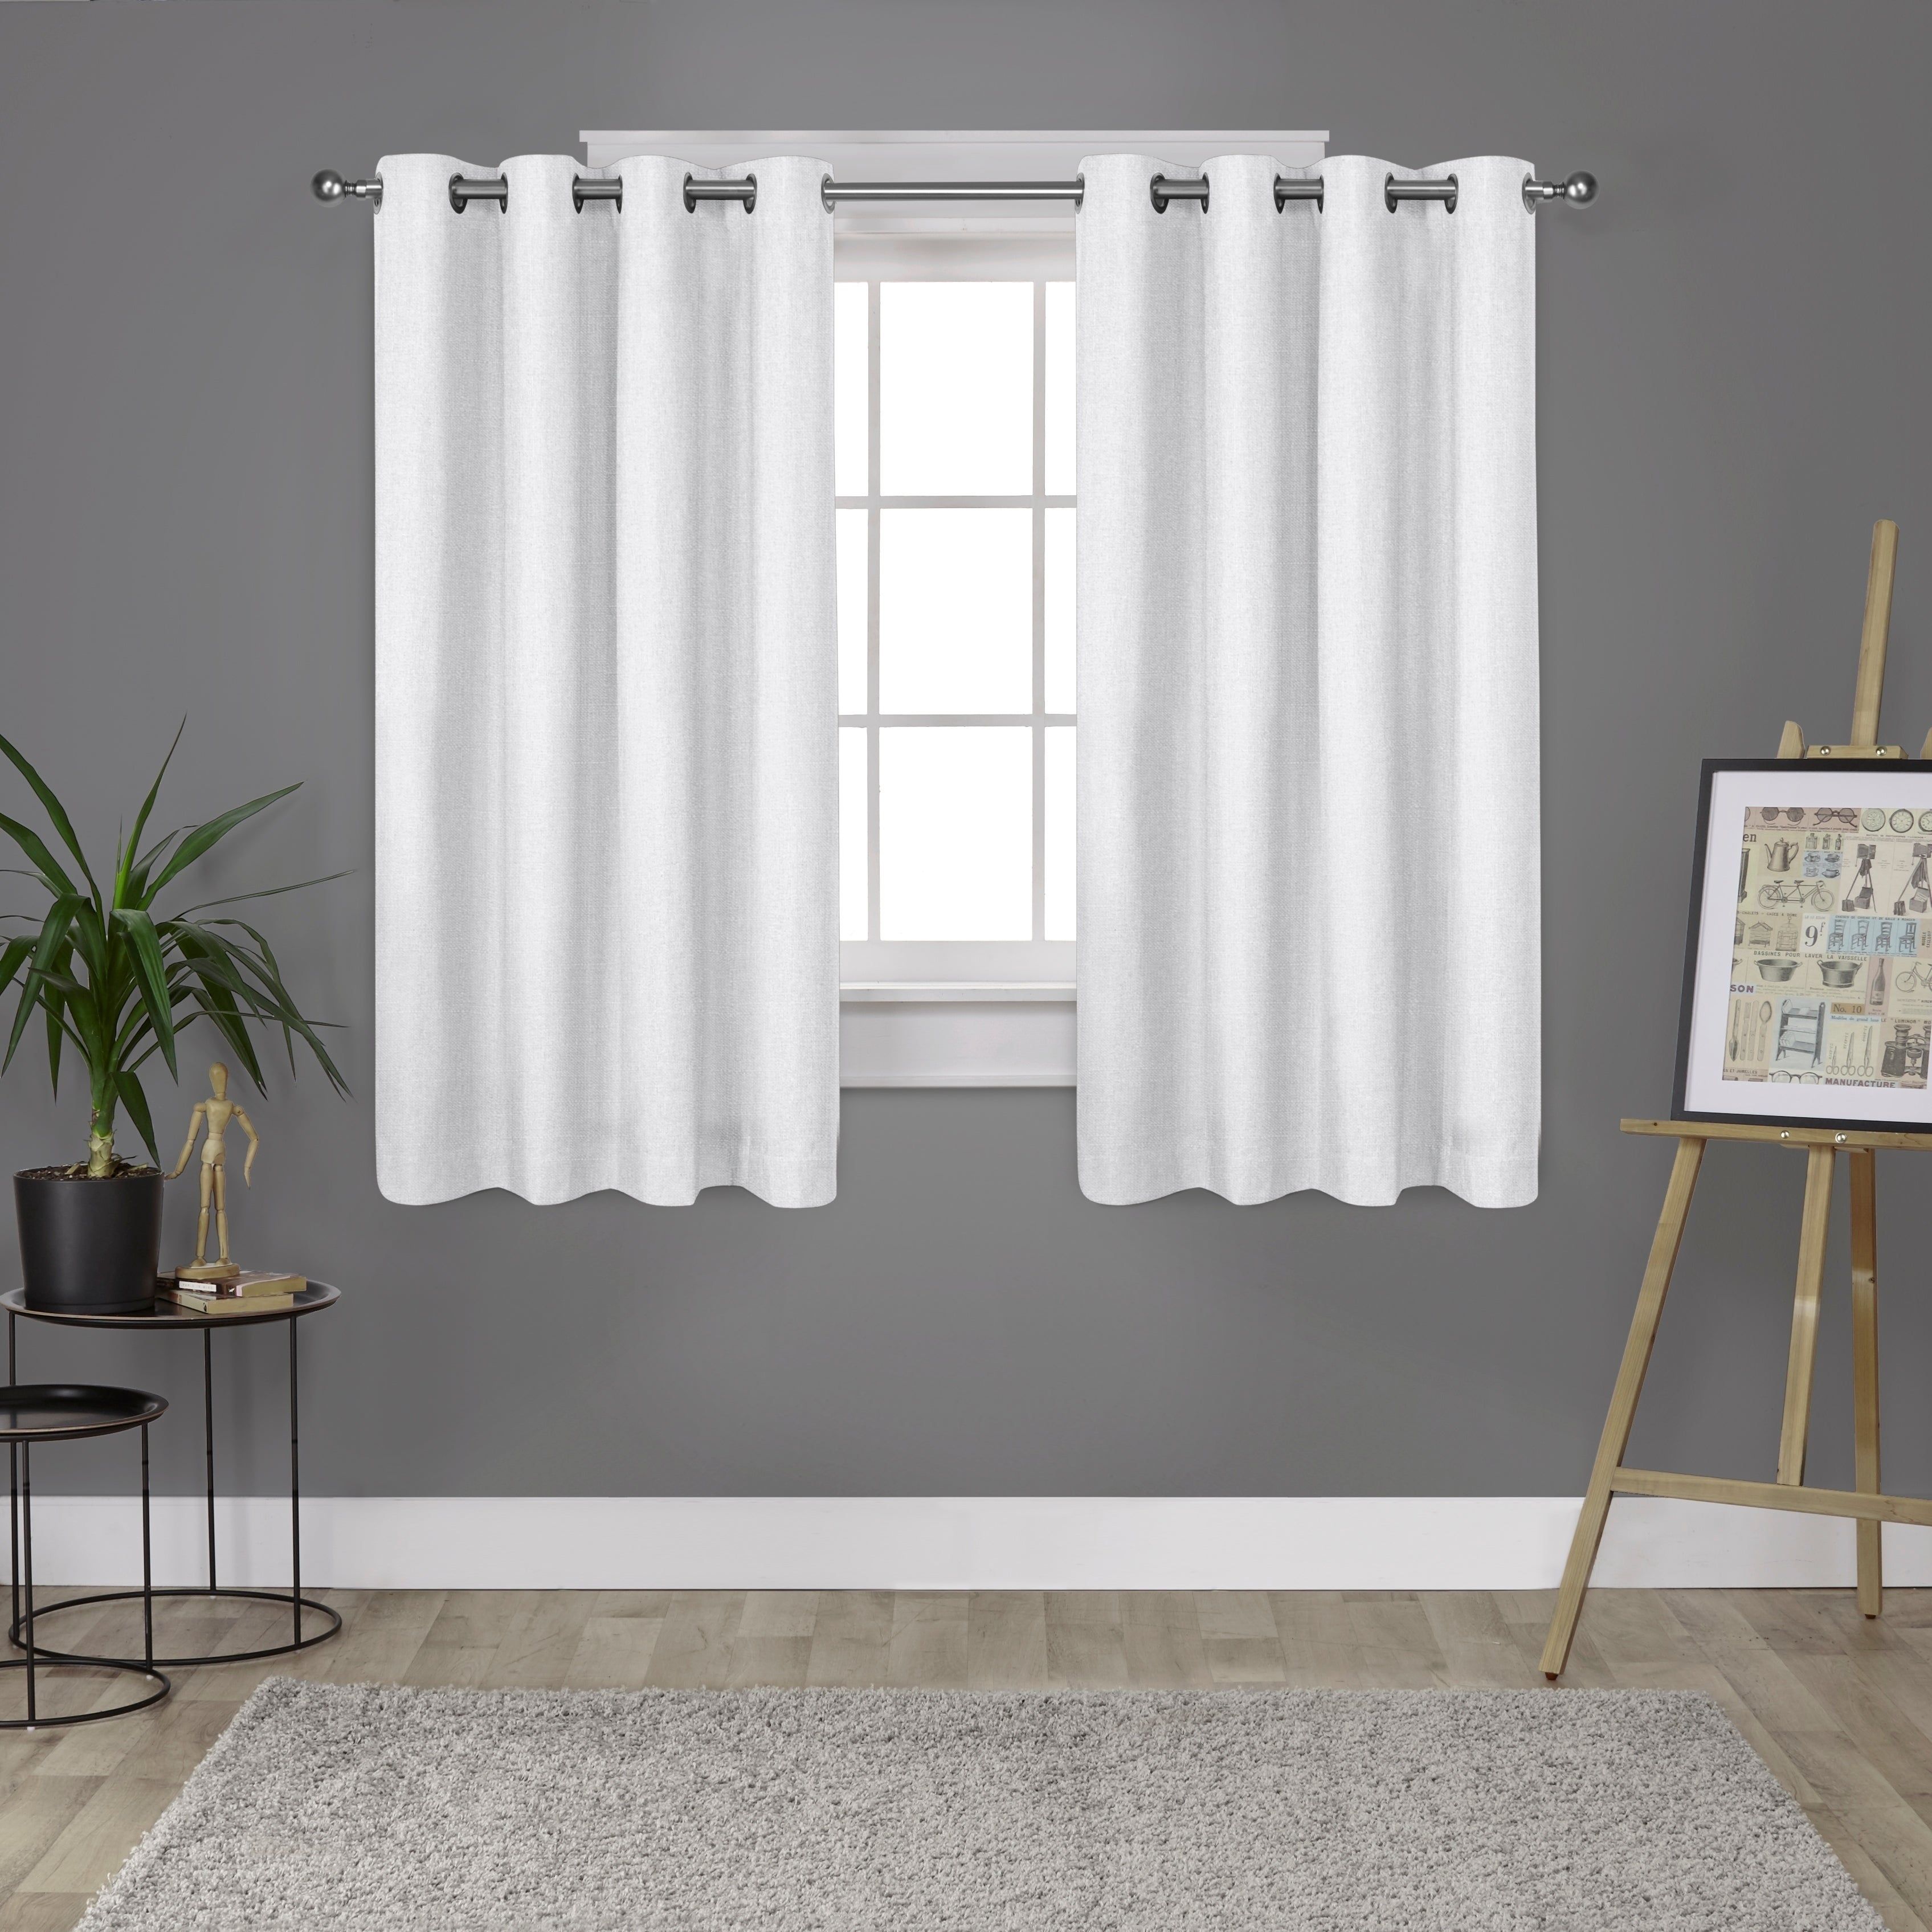 Porch & Den Sugar Creek Grommet Top Loha Linen Window Curtain Panel Pair In  Winter White (52x63)(as Is Item) | Overstock Shopping – The Best Deals Throughout Sugar Creek Grommet Top Loha Linen Window Curtain Panel Pairs (View 13 of 30)